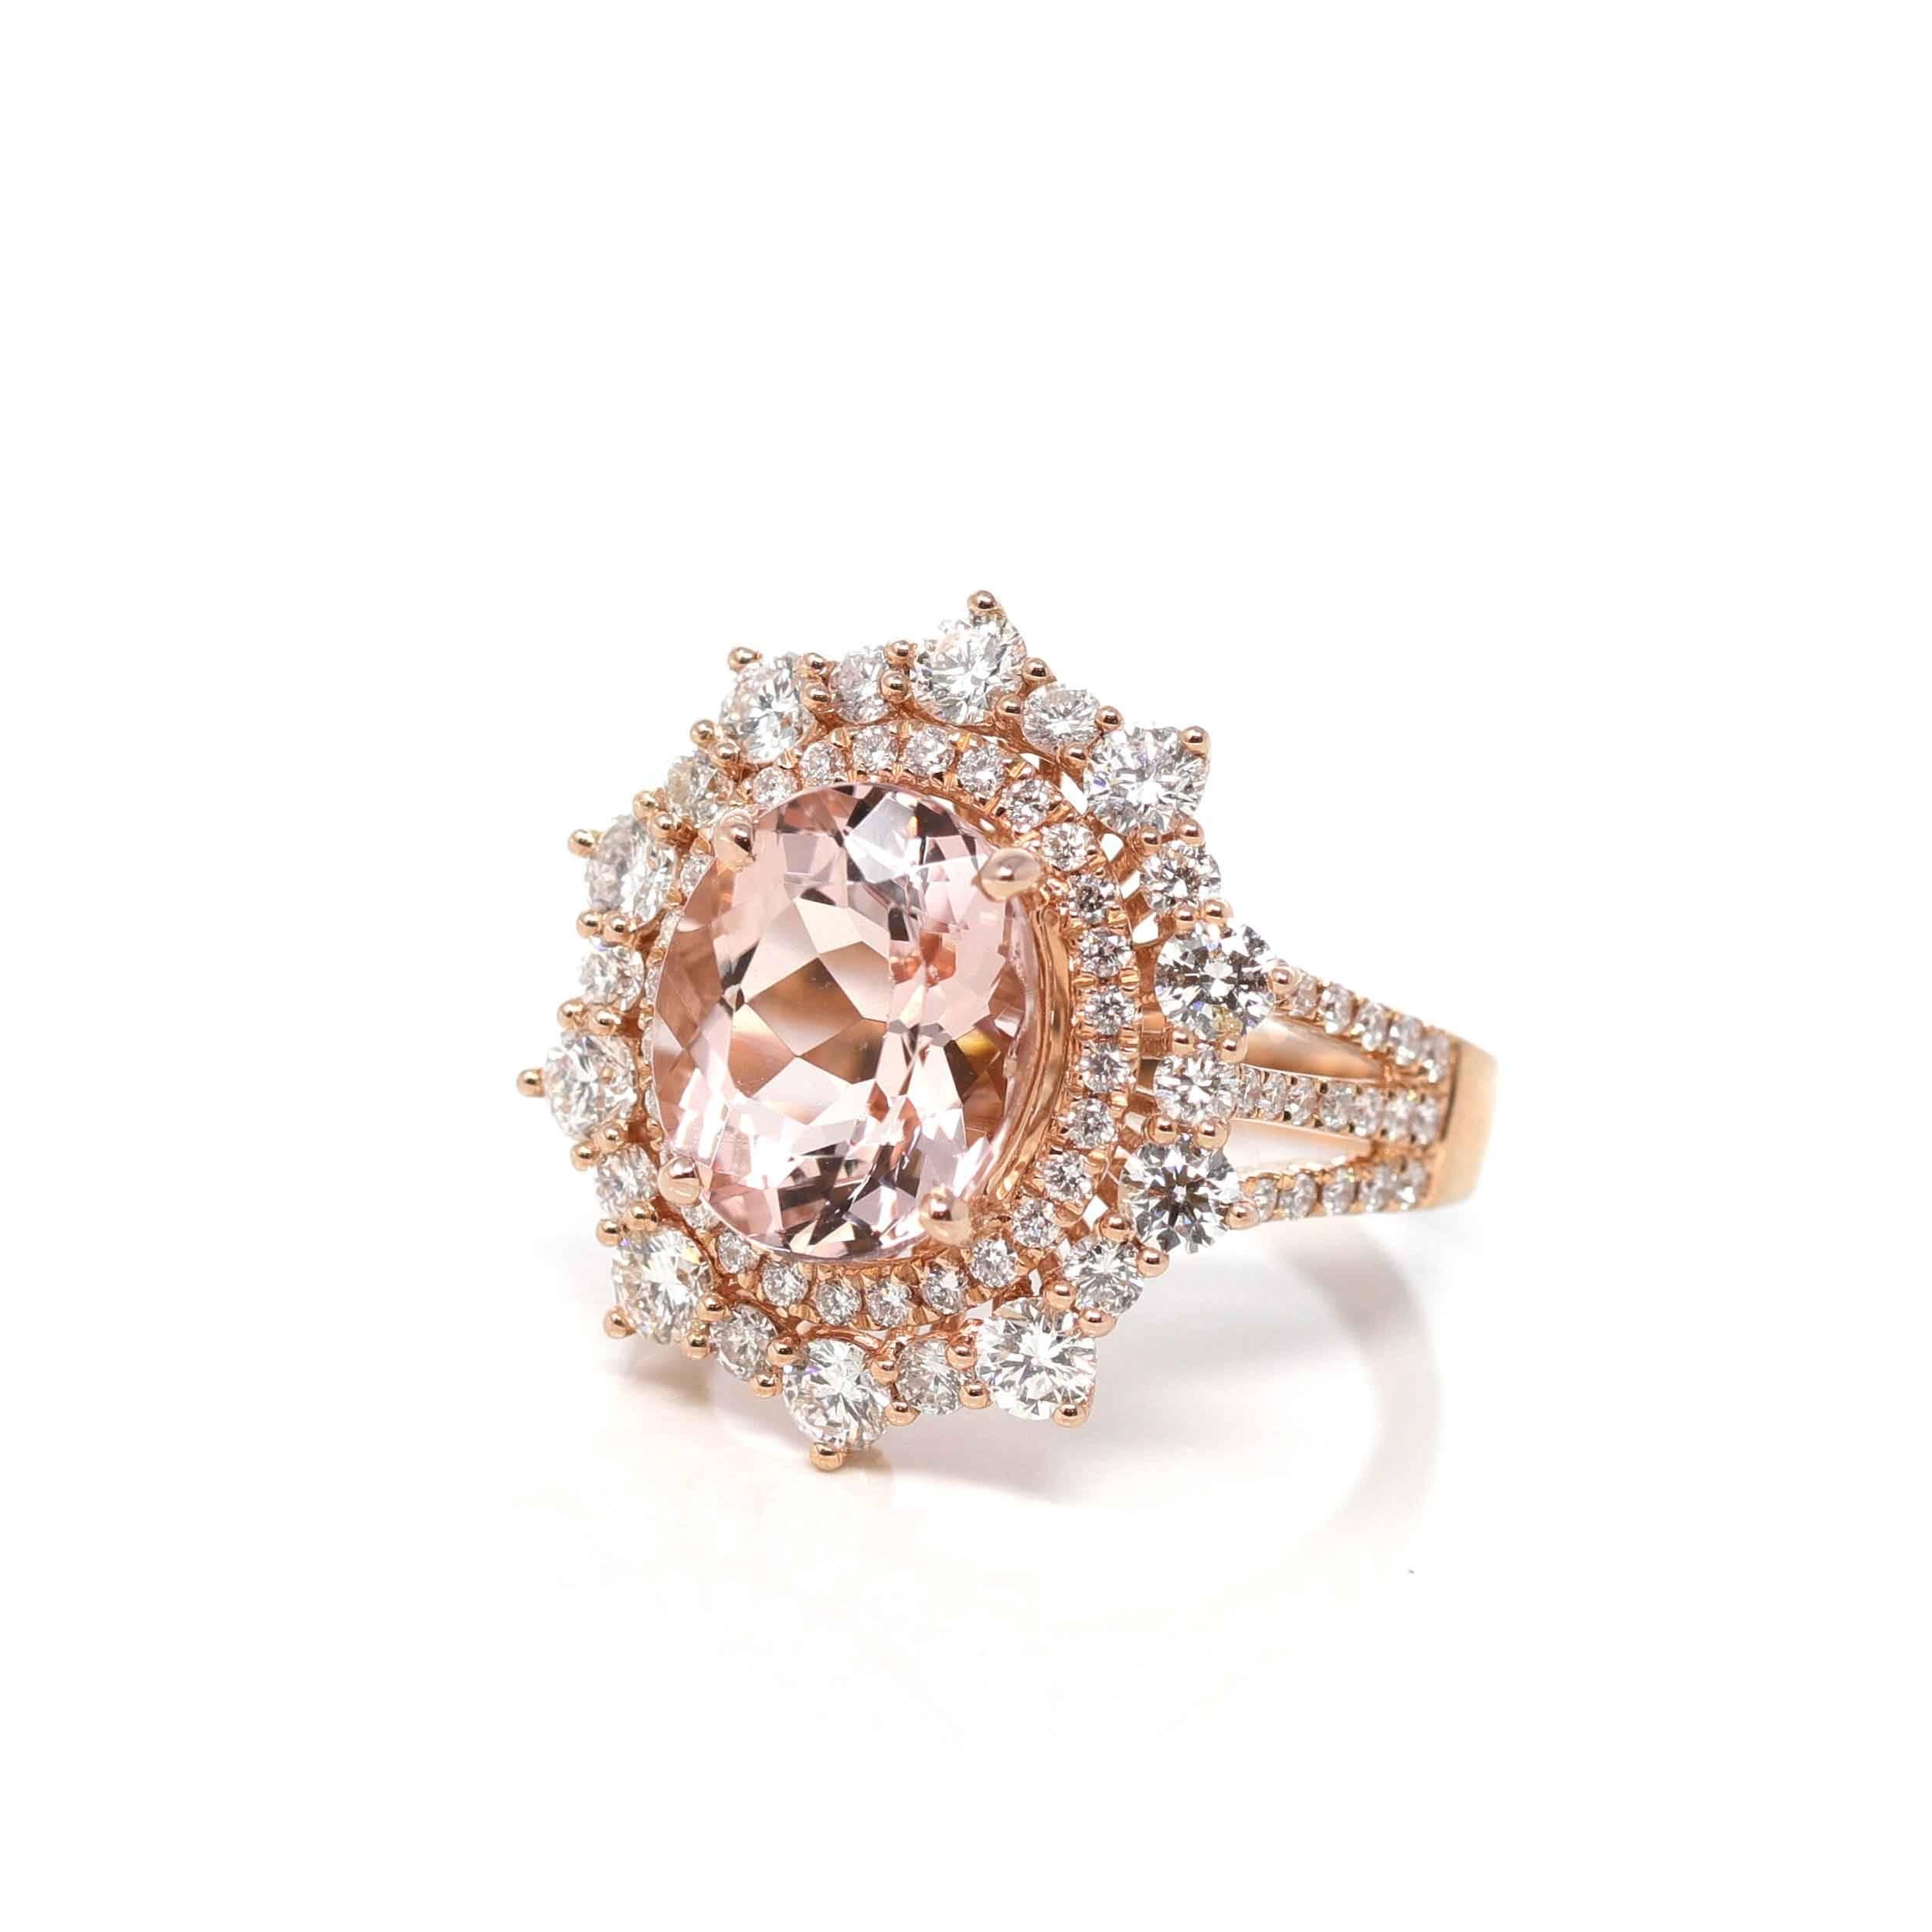 * Design Concept--- This ring features Massive Oval Brazillian Morganite 3.53 ct. The design is simplistic yet elegant. The ring looks very exquisite with some diamonds tracing the accents. Baikalla artisans are dedicated to combining beautiful